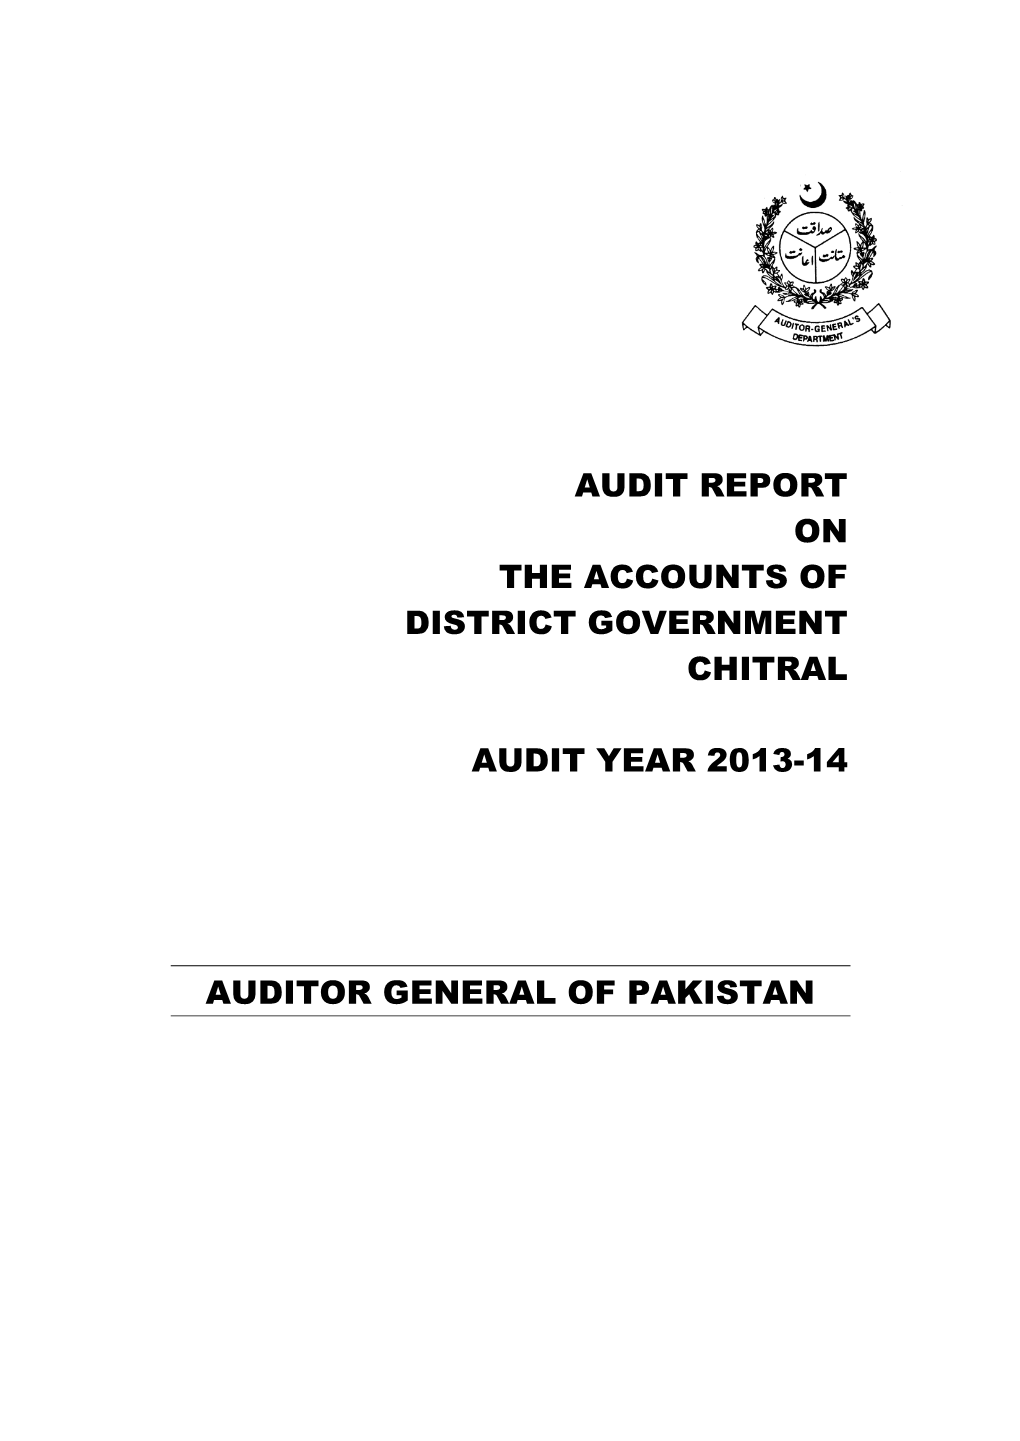 Audit Report on the Accounts of District Government Chitral Audit Year 2013-14 Auditor General of Pakistan